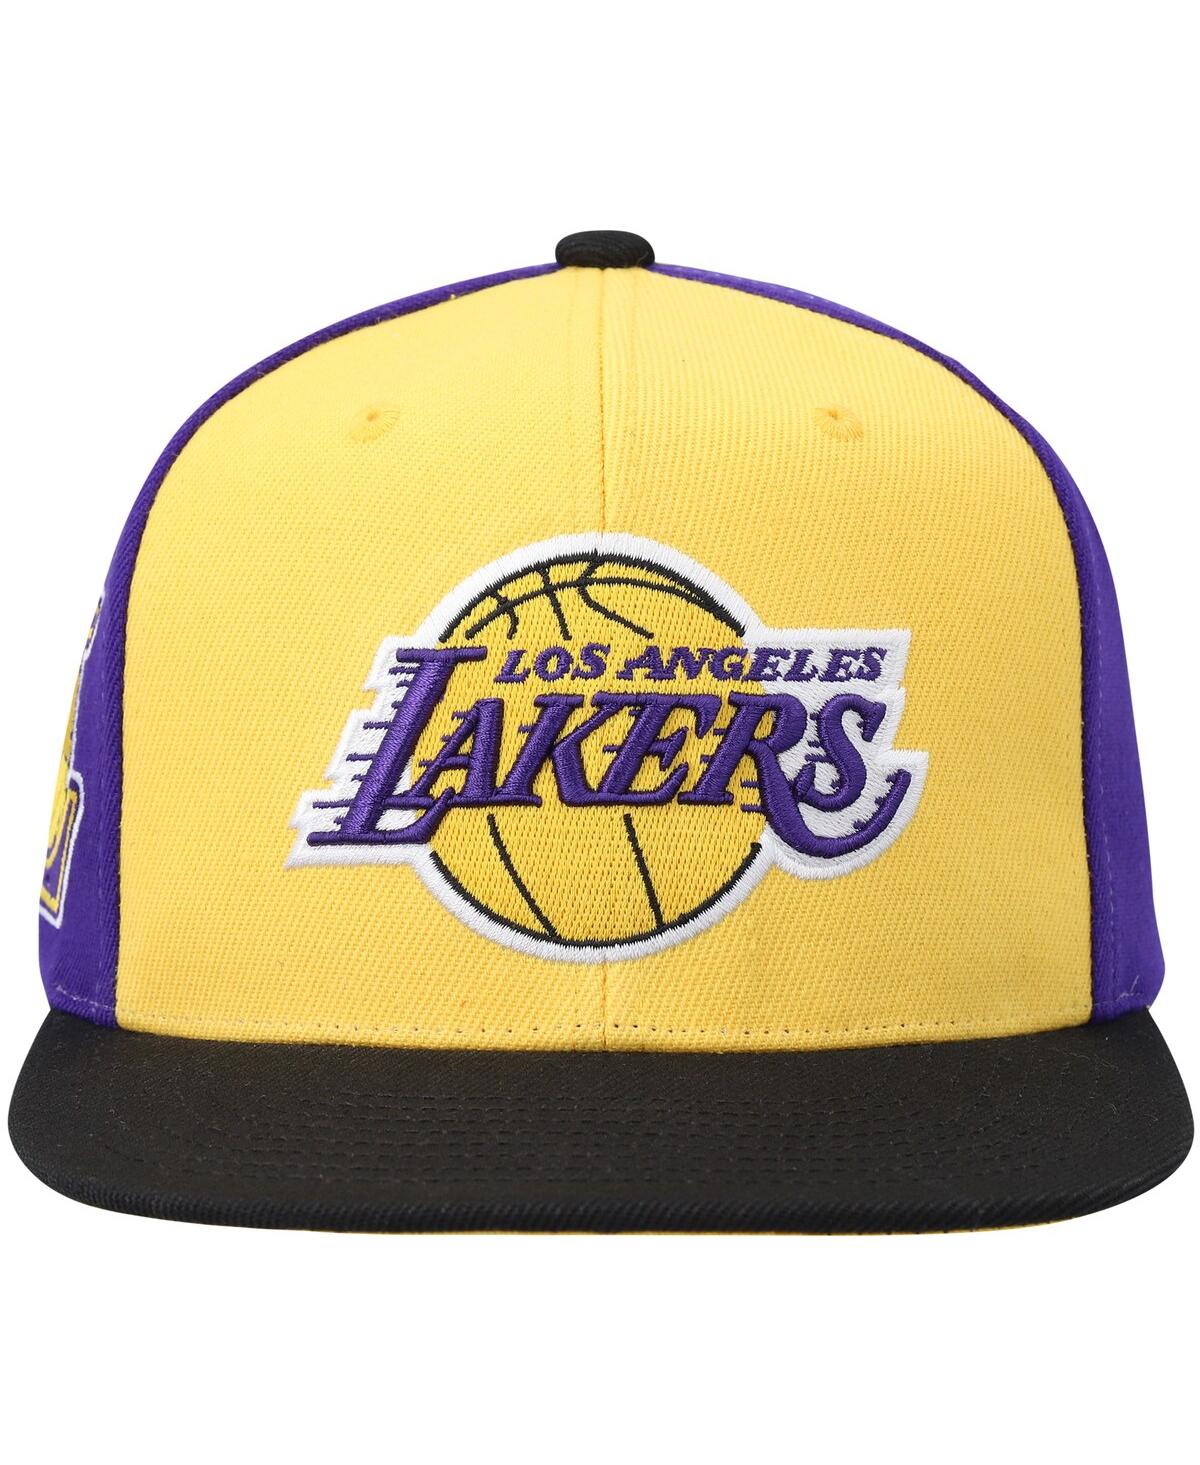 Shop Mitchell & Ness Men's  Gold Los Angeles Lakers On The Block Snapback Hat